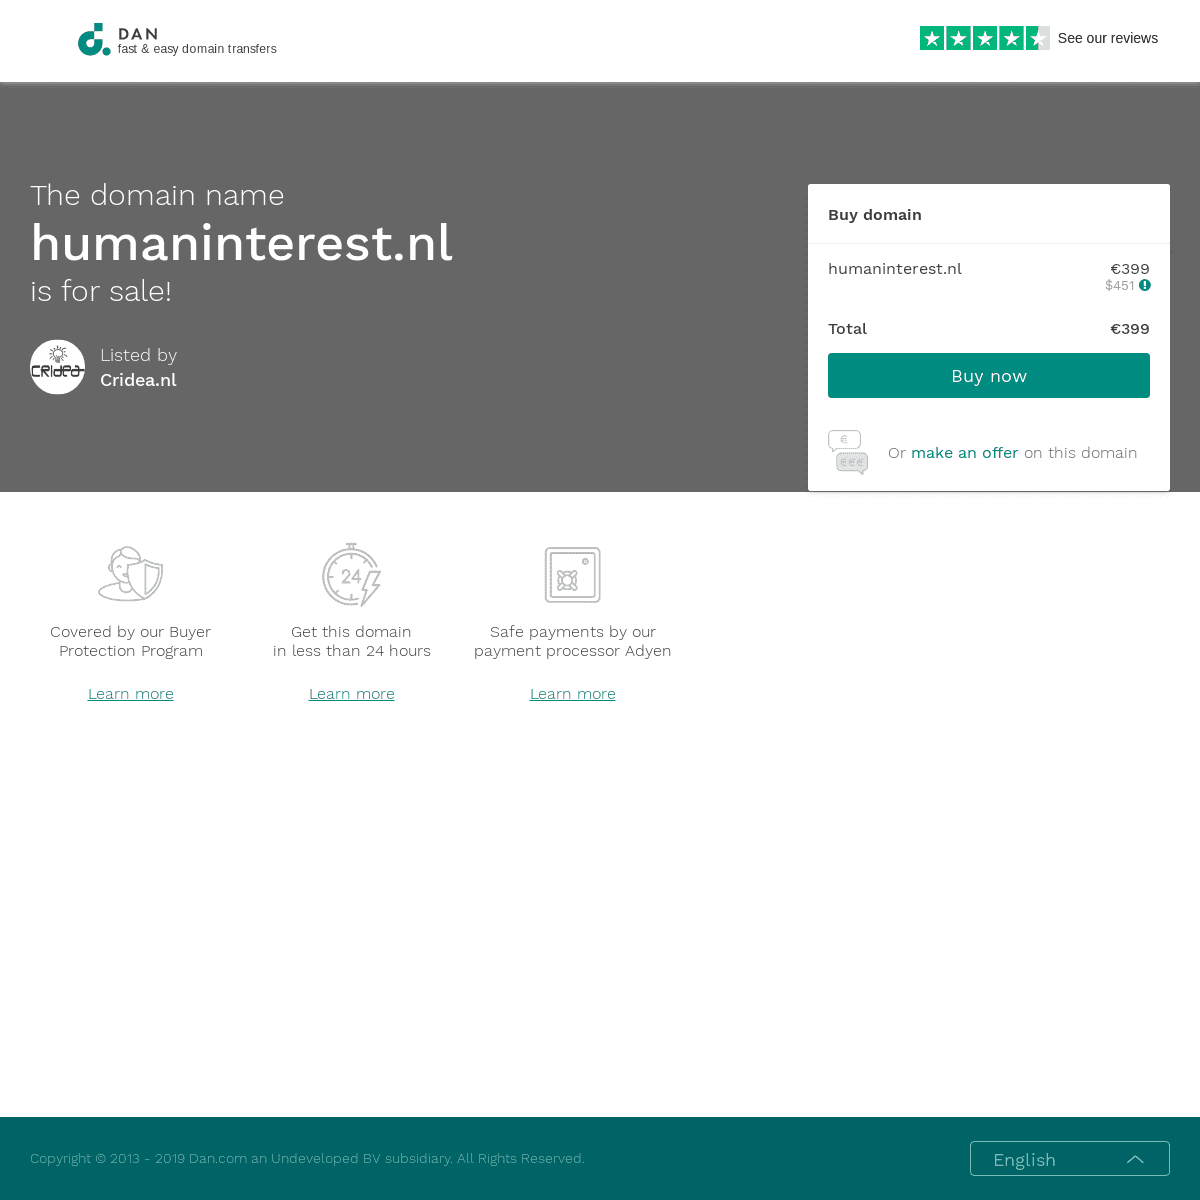 A complete backup of humaninterest.nl